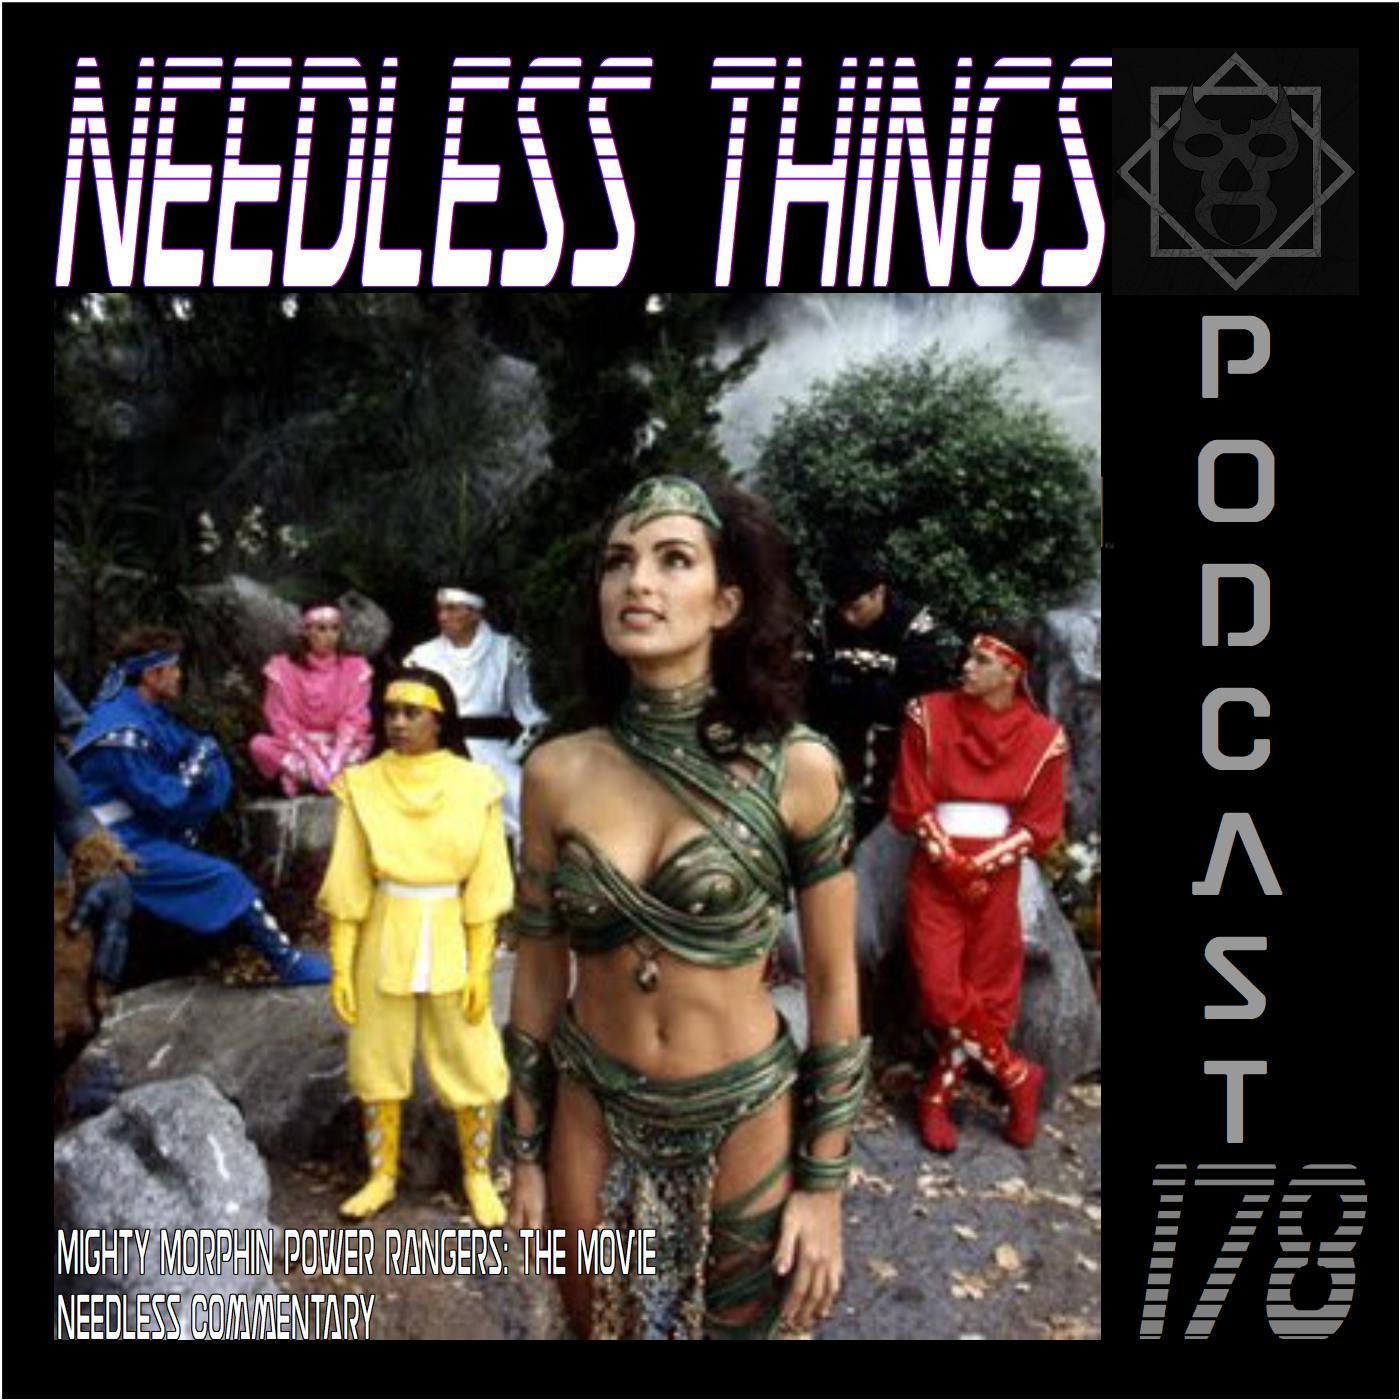 Needless Things Podcast 178 – Mighty Morphin Power Rangers: The Movie Needless Commentary